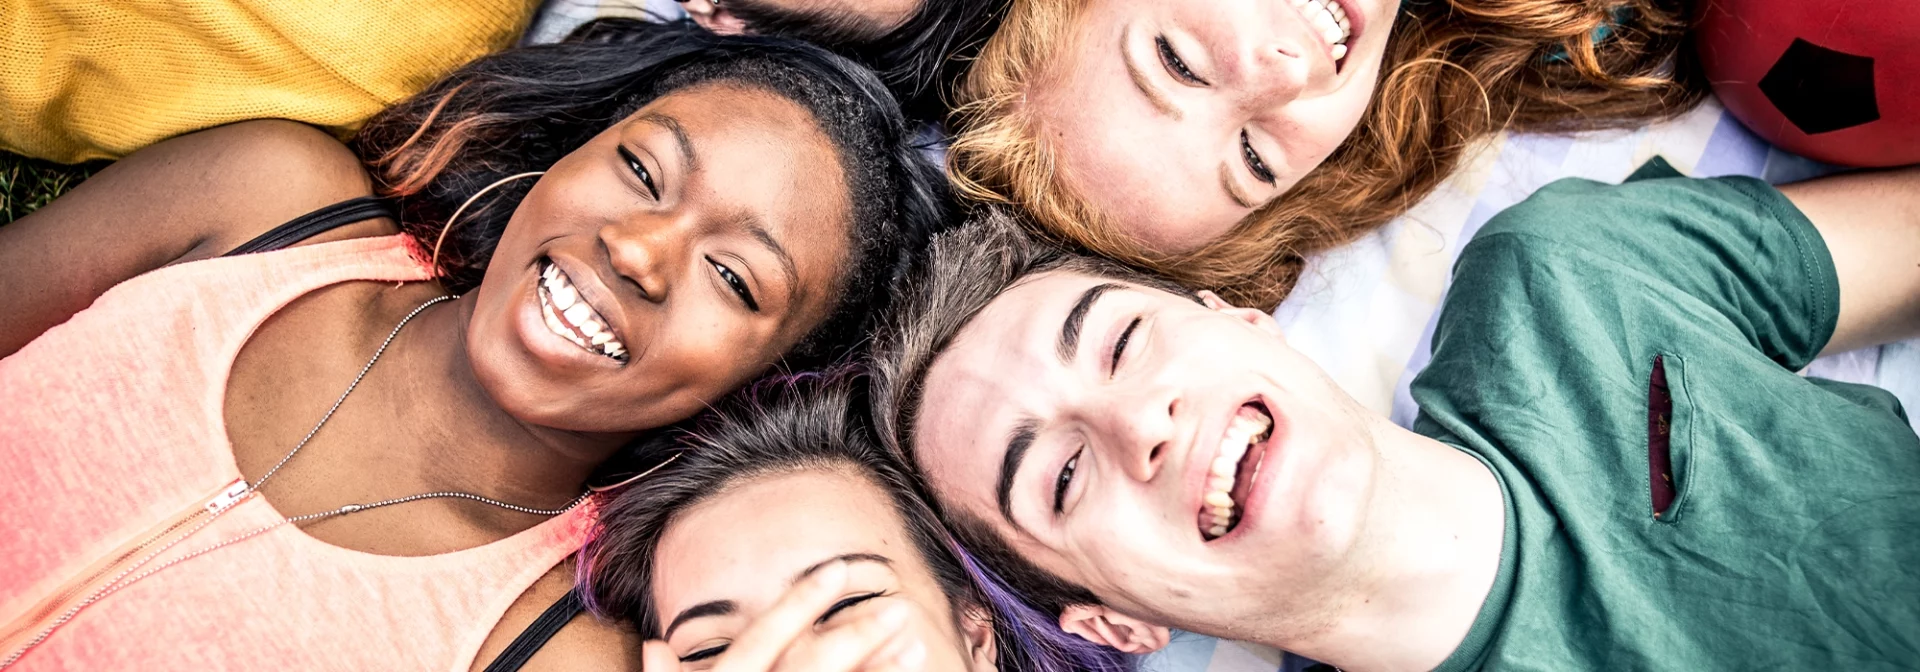 bright, smiling group of diverse teens laughing together